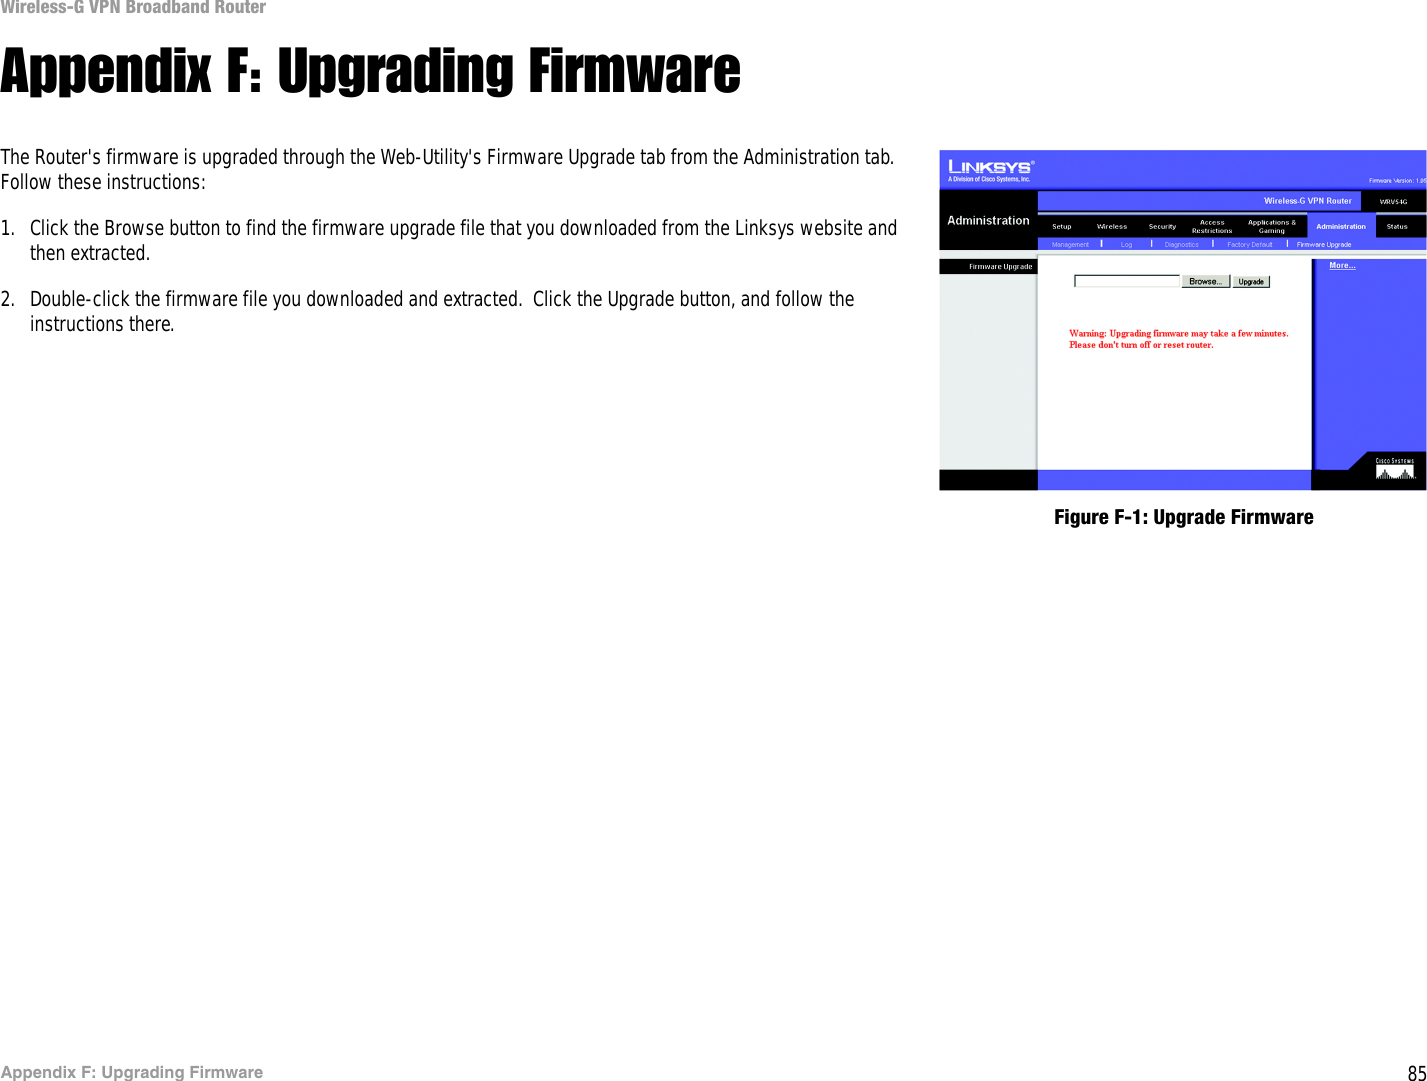 85Appendix F: Upgrading FirmwareWireless-G VPN Broadband RouterAppendix F: Upgrading FirmwareThe Router&apos;s firmware is upgraded through the Web-Utility&apos;s Firmware Upgrade tab from the Administration tab. Follow these instructions:1. Click the Browse button to find the firmware upgrade file that you downloaded from the Linksys website and then extracted. 2. Double-click the firmware file you downloaded and extracted.  Click the Upgrade button, and follow the instructions there.Figure F-1: Upgrade Firmware